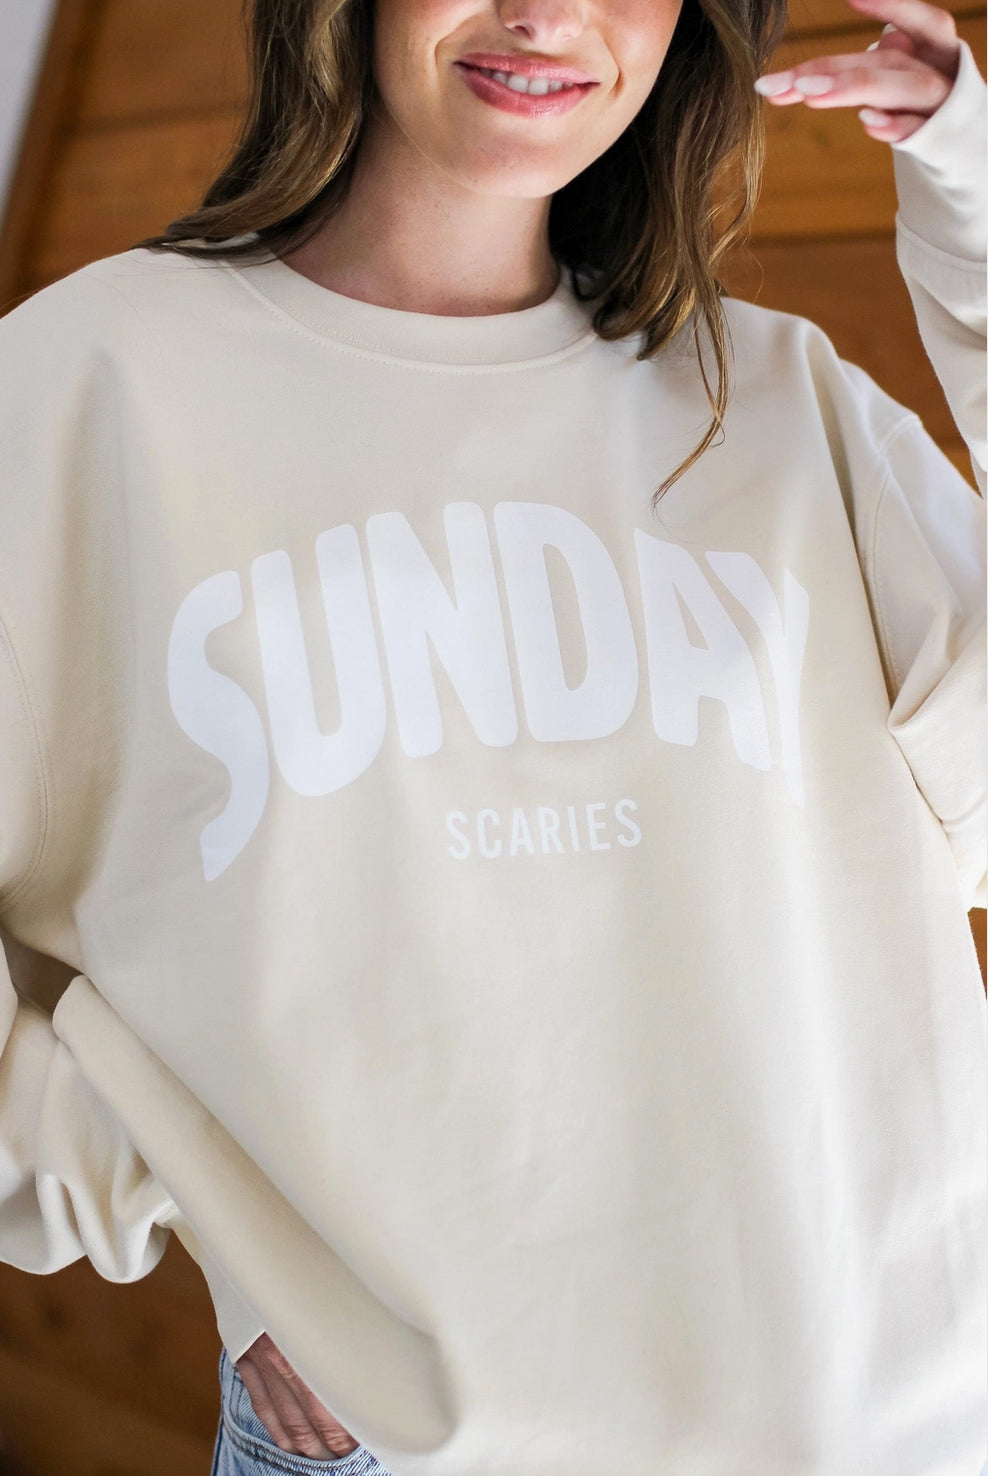 SUNDAY SCARIES Pullover